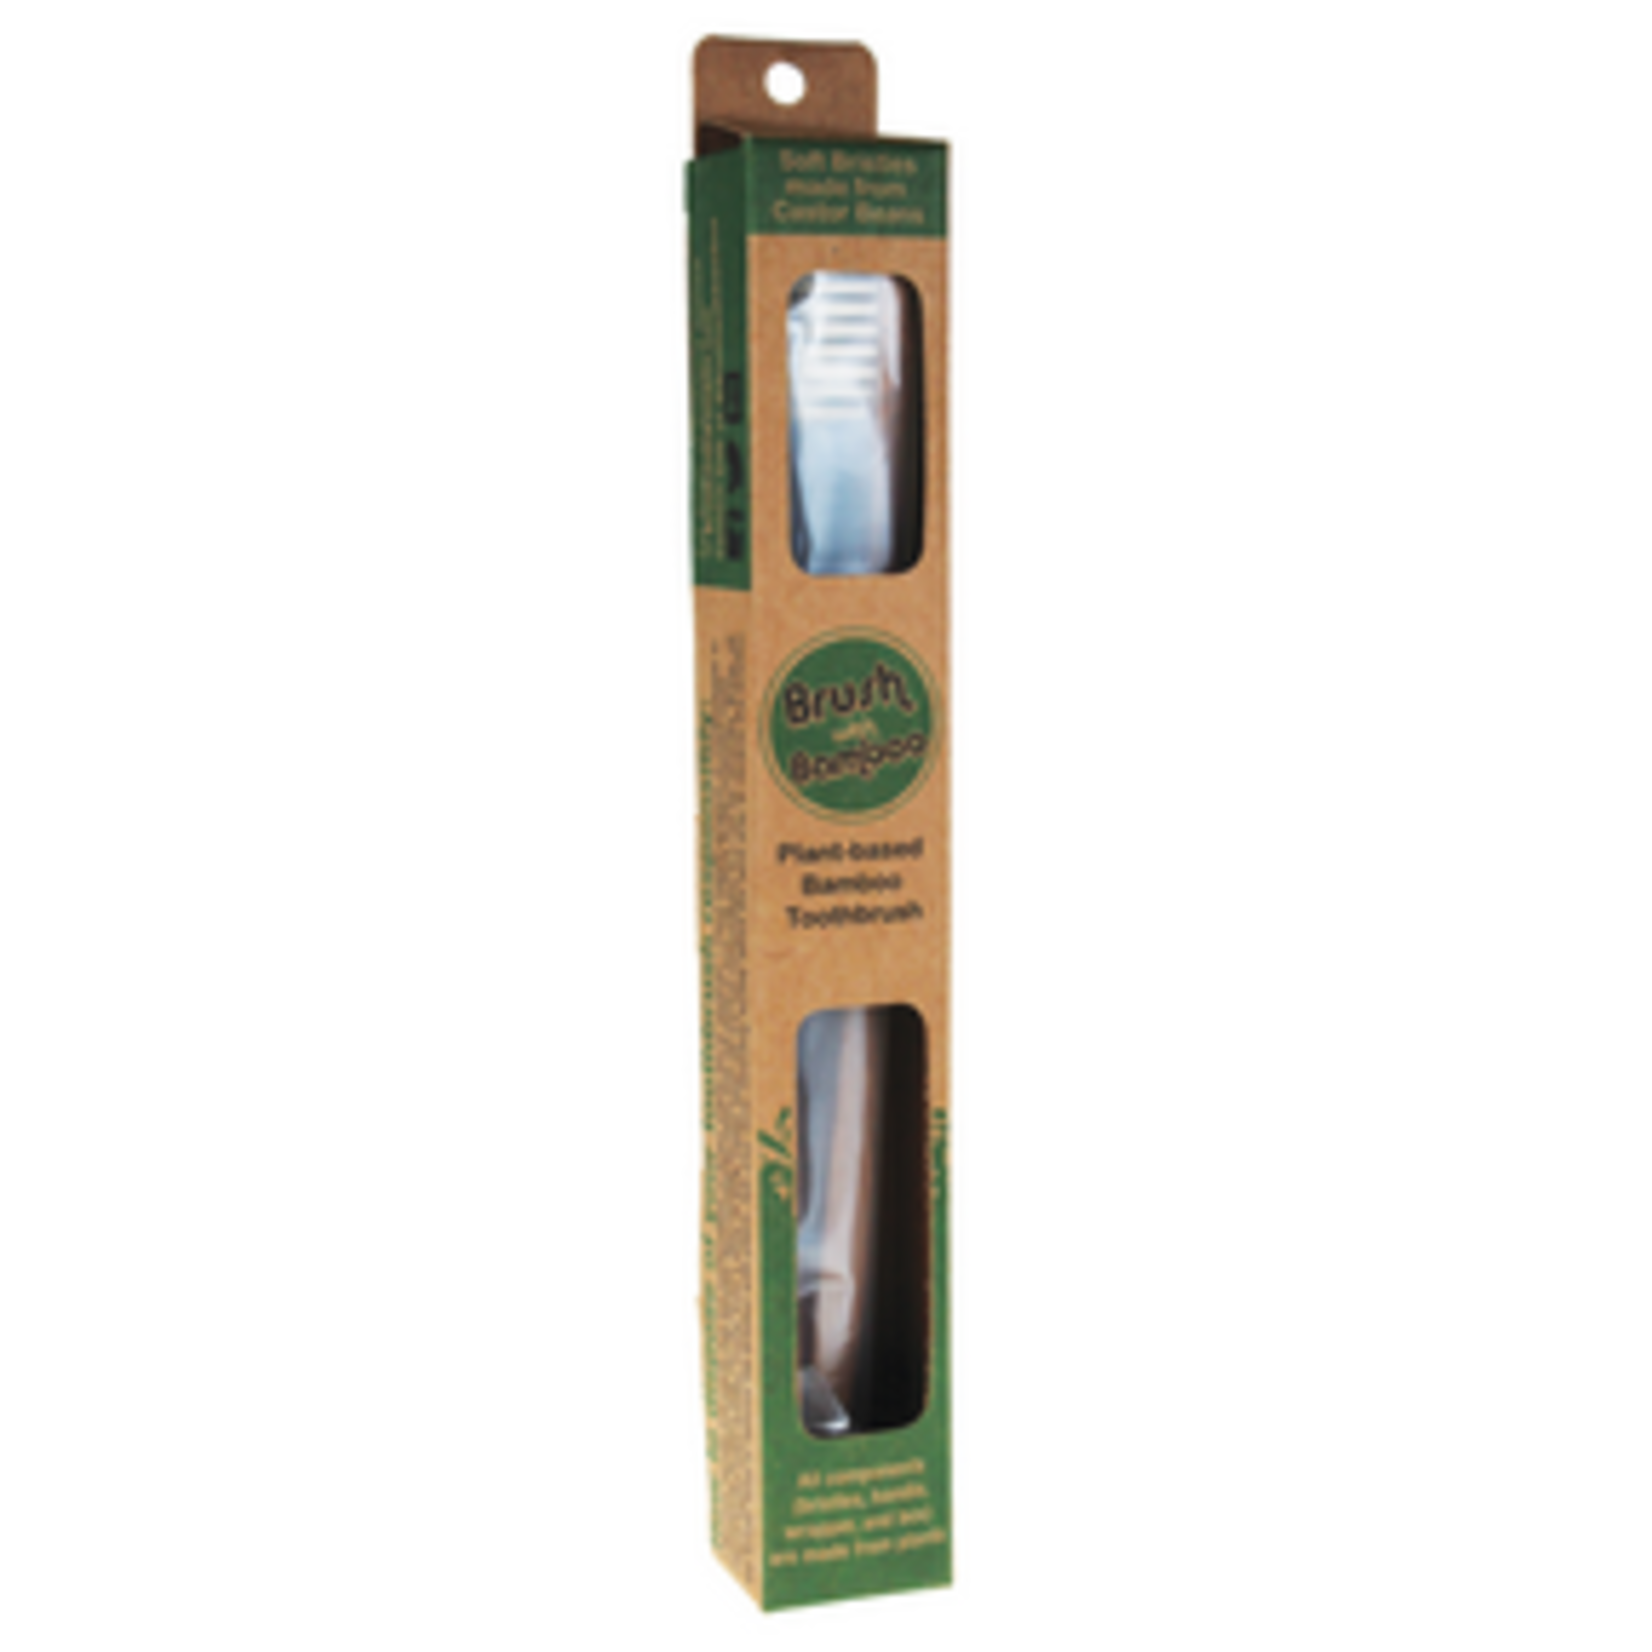 BRUSH WITH BAMBOO BRUSH WITH BAMBOO ADULT TOOTHBRUSH